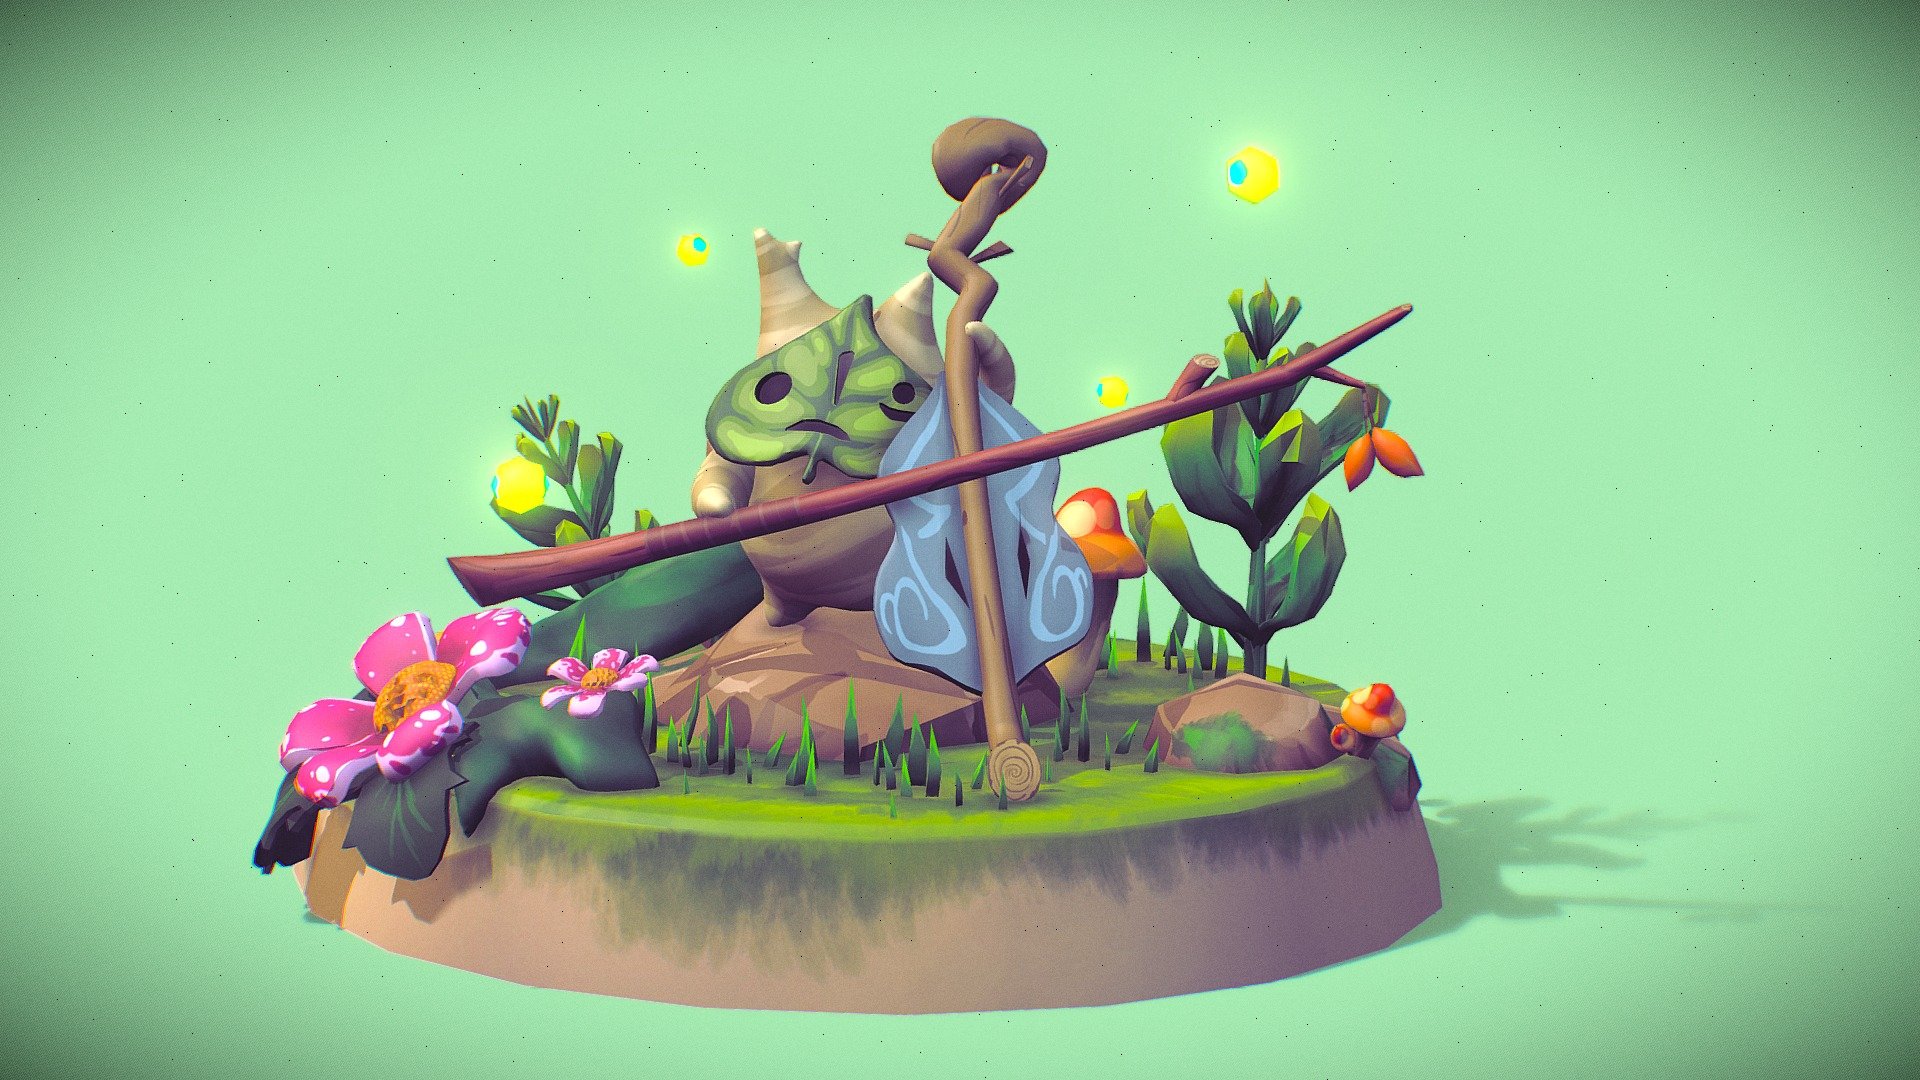 Low poly diorama with Makar from The Legend of Zelda Wind Waker playing music. I tried for the first time to use the sculpting tool in Maya, Hope you guys will like him !! - Zelda Wind Waker Makar - 3D model by FaNapha 3d model